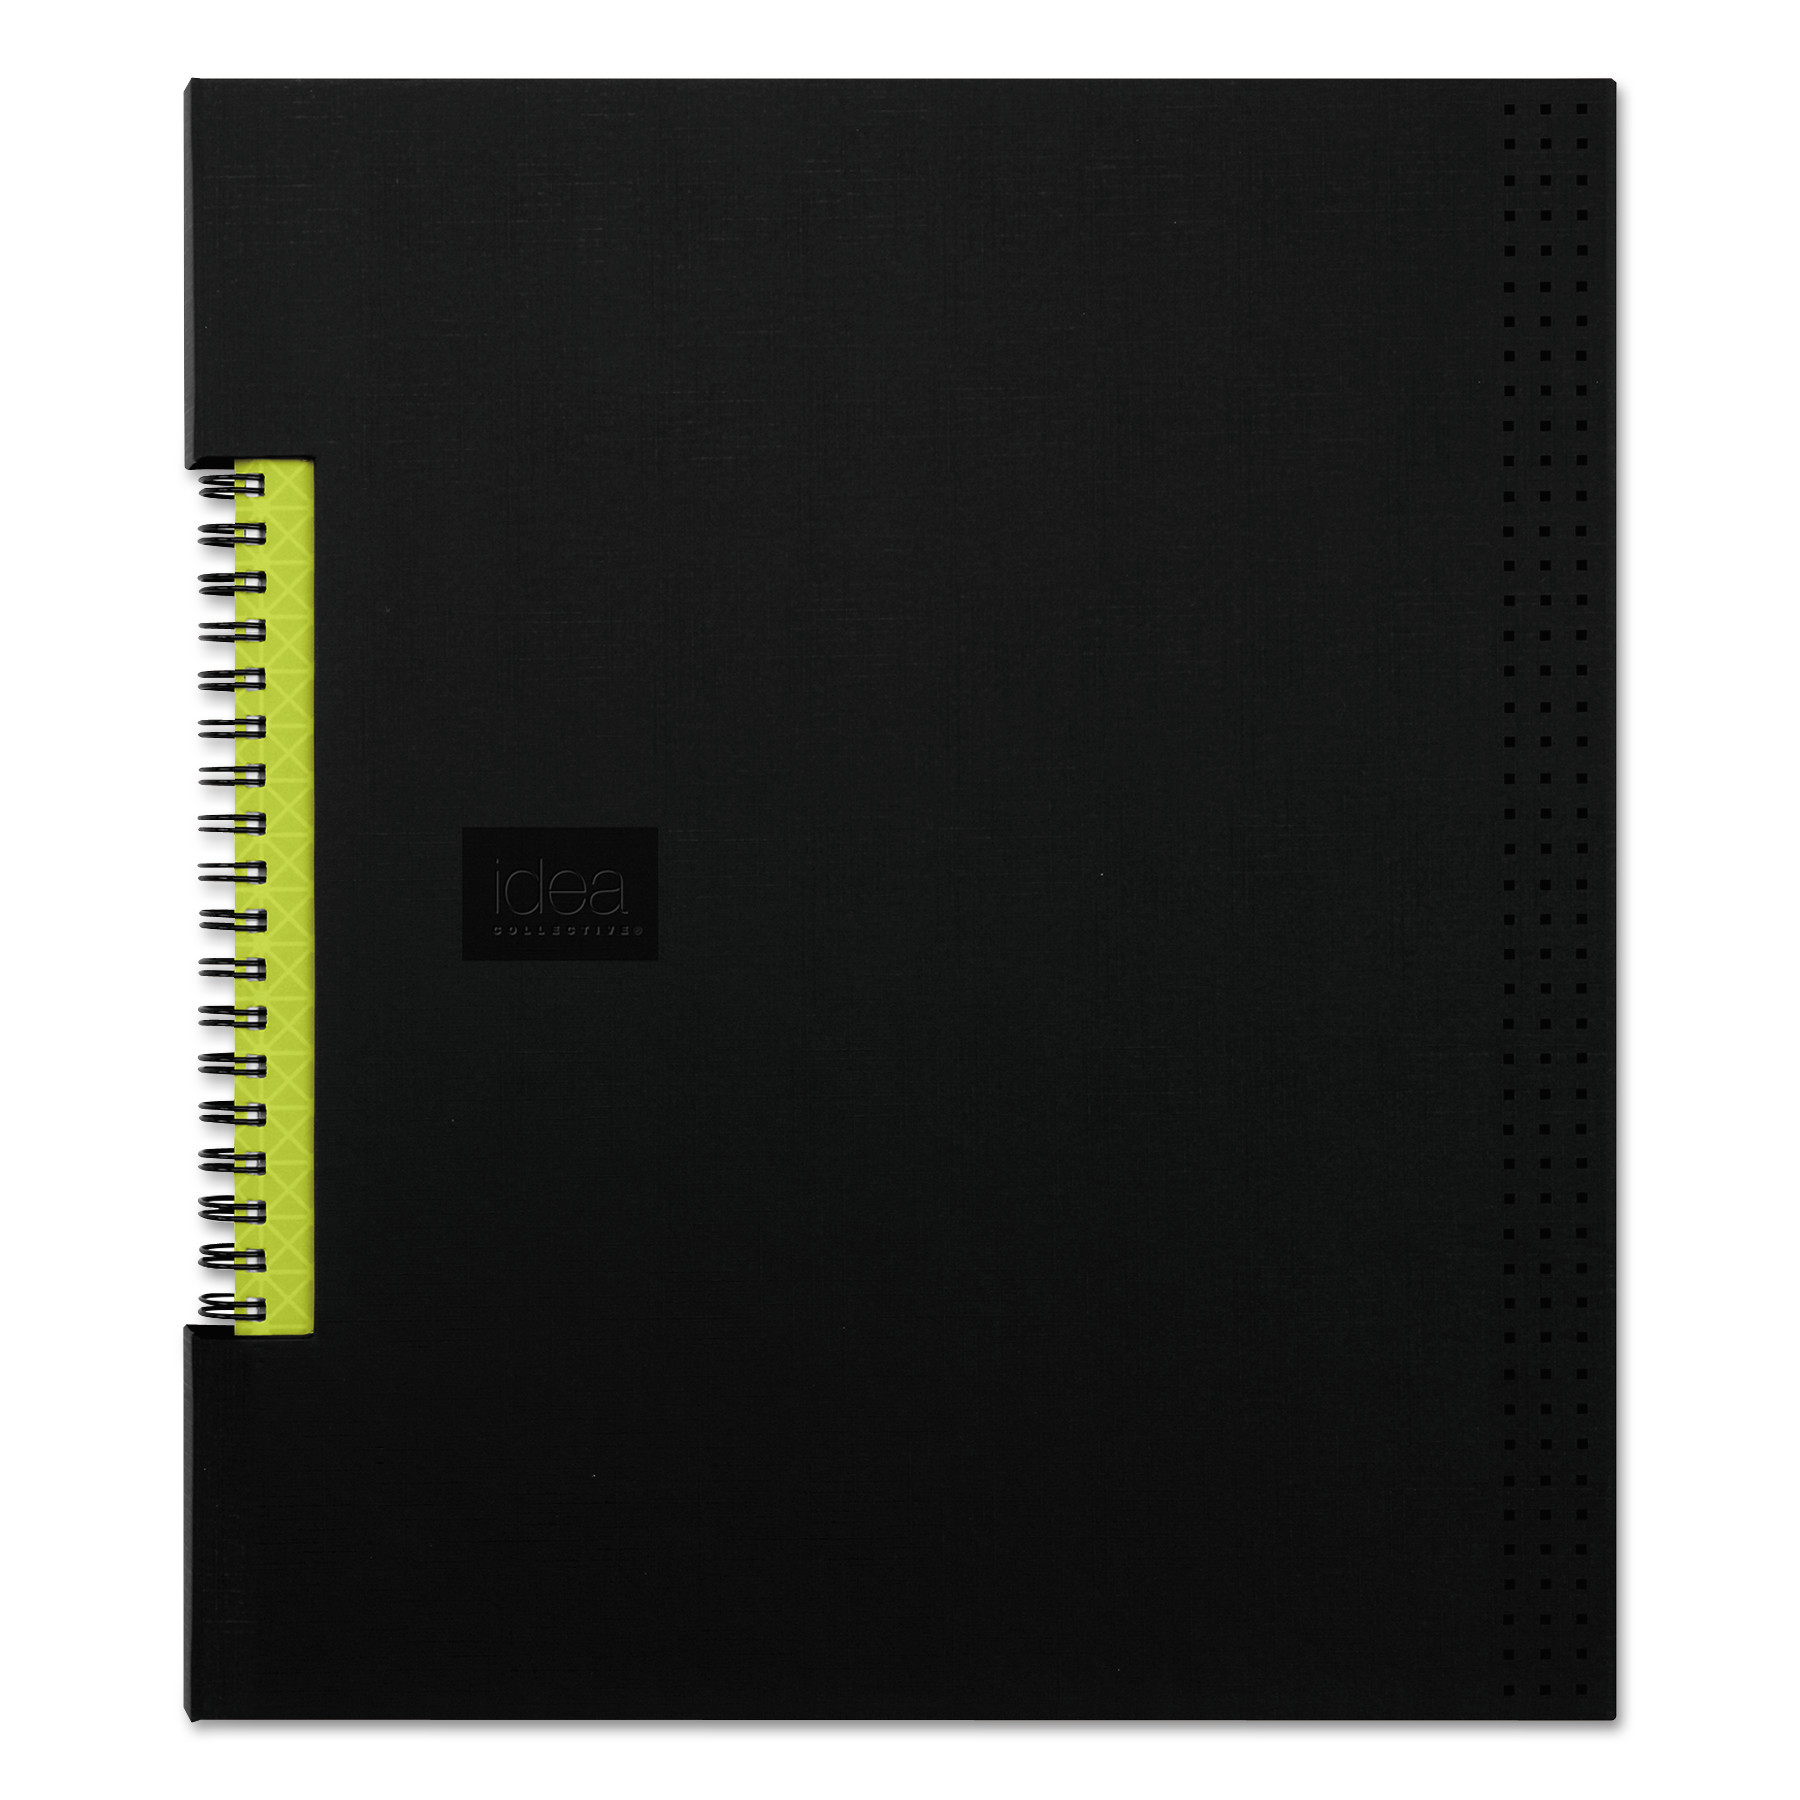  Oxford 56895 Idea Collective Professional Wirebound Hardcover Notebook, 8 1/2 x 11, Black (TOP56895) 